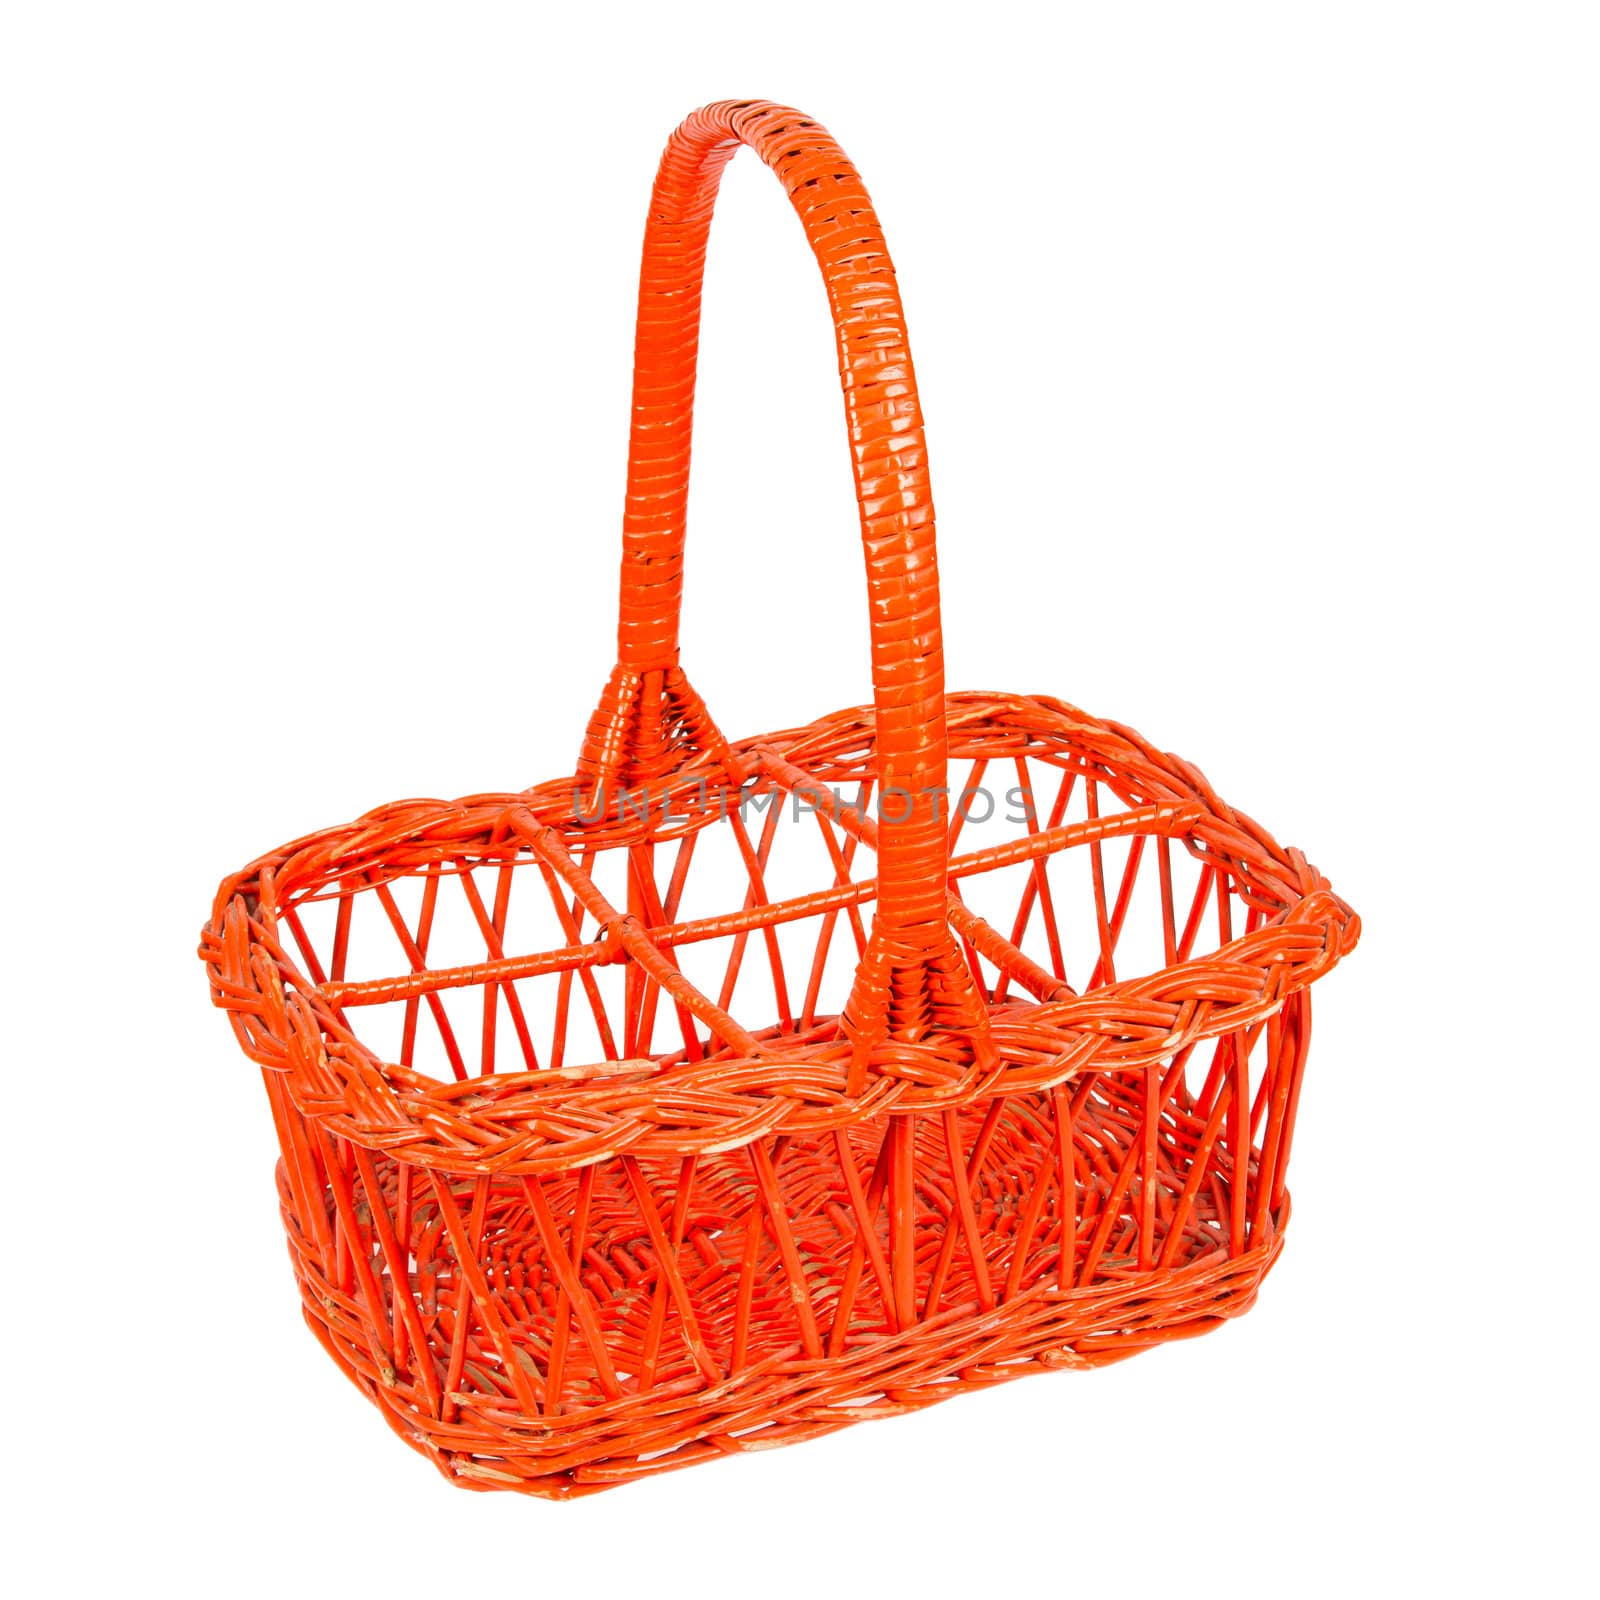 Red basket for bottles by michaklootwijk